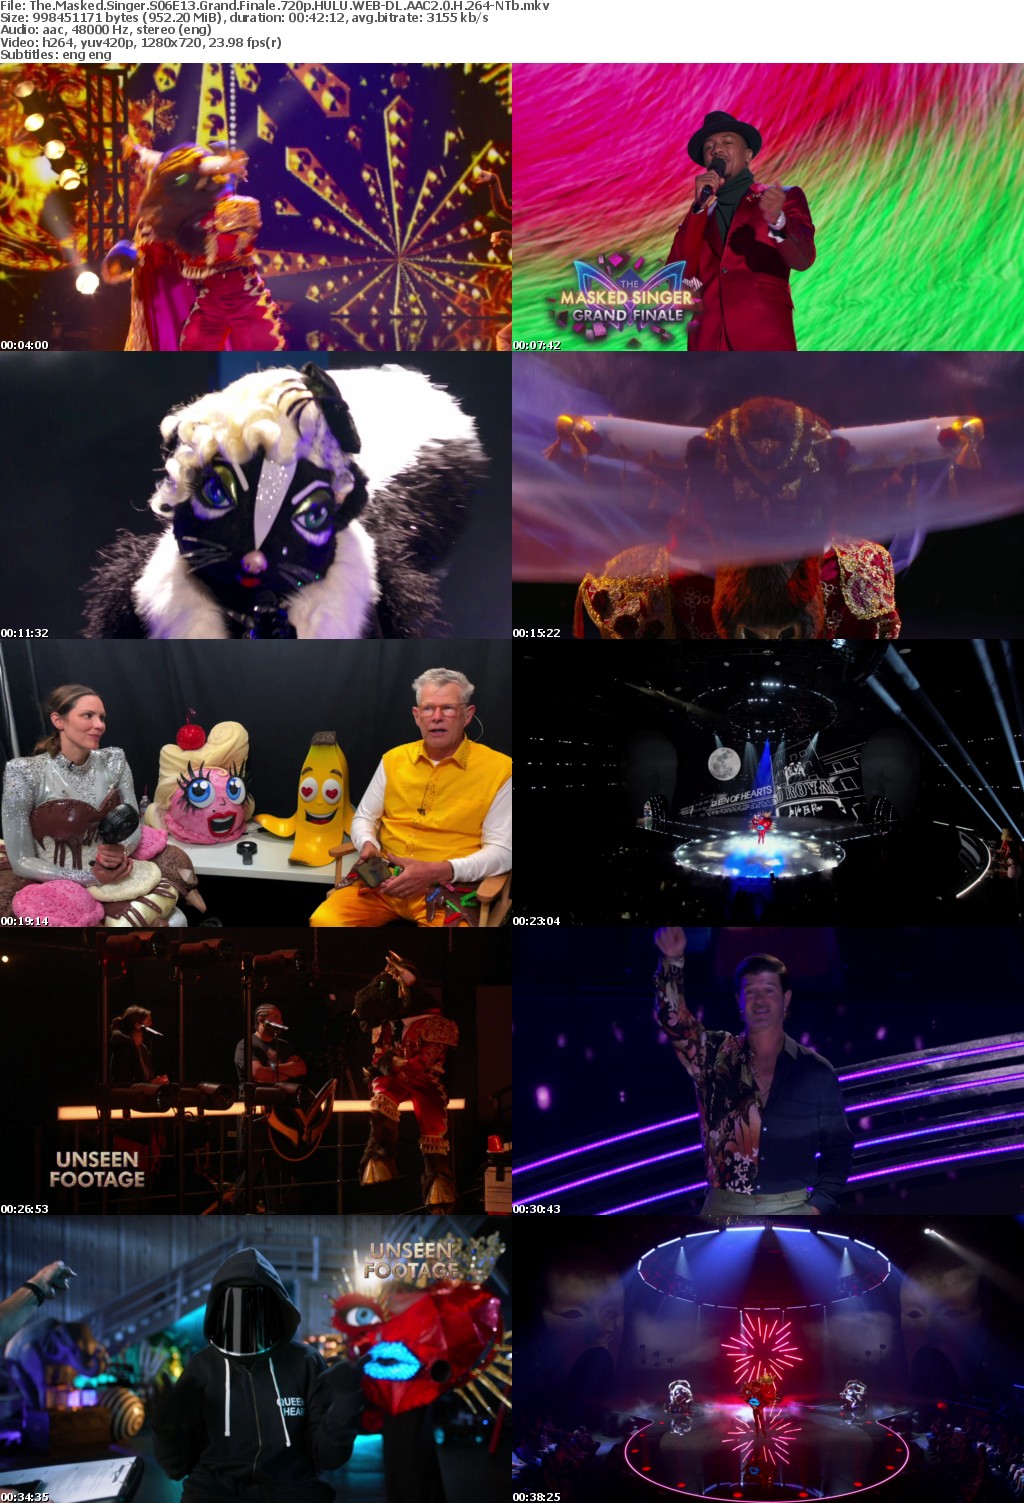 The Masked Singer S06E13 Grand Finale 720p HULU WEBRip AAC2 0 H264-NTb